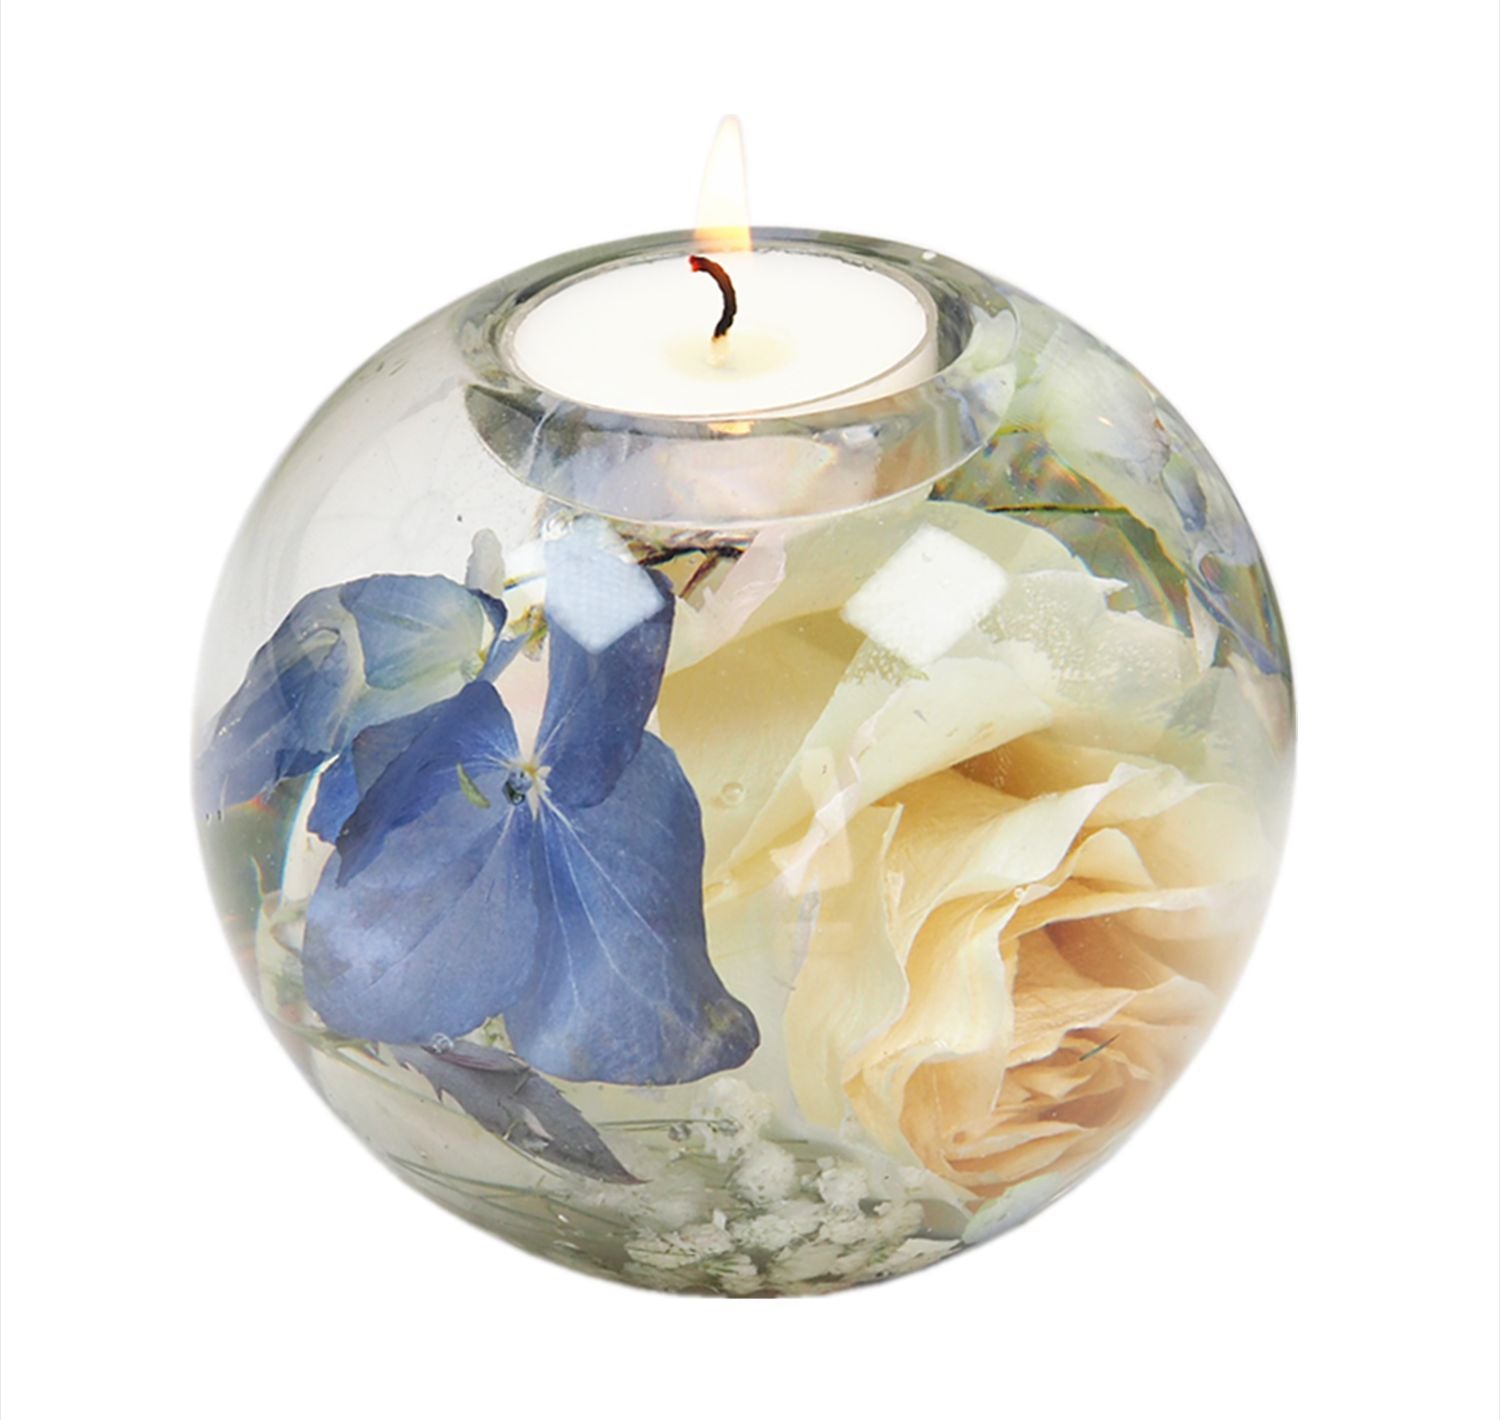 Sphere Tealight Holder Silicone Resin Votive Candle Mold